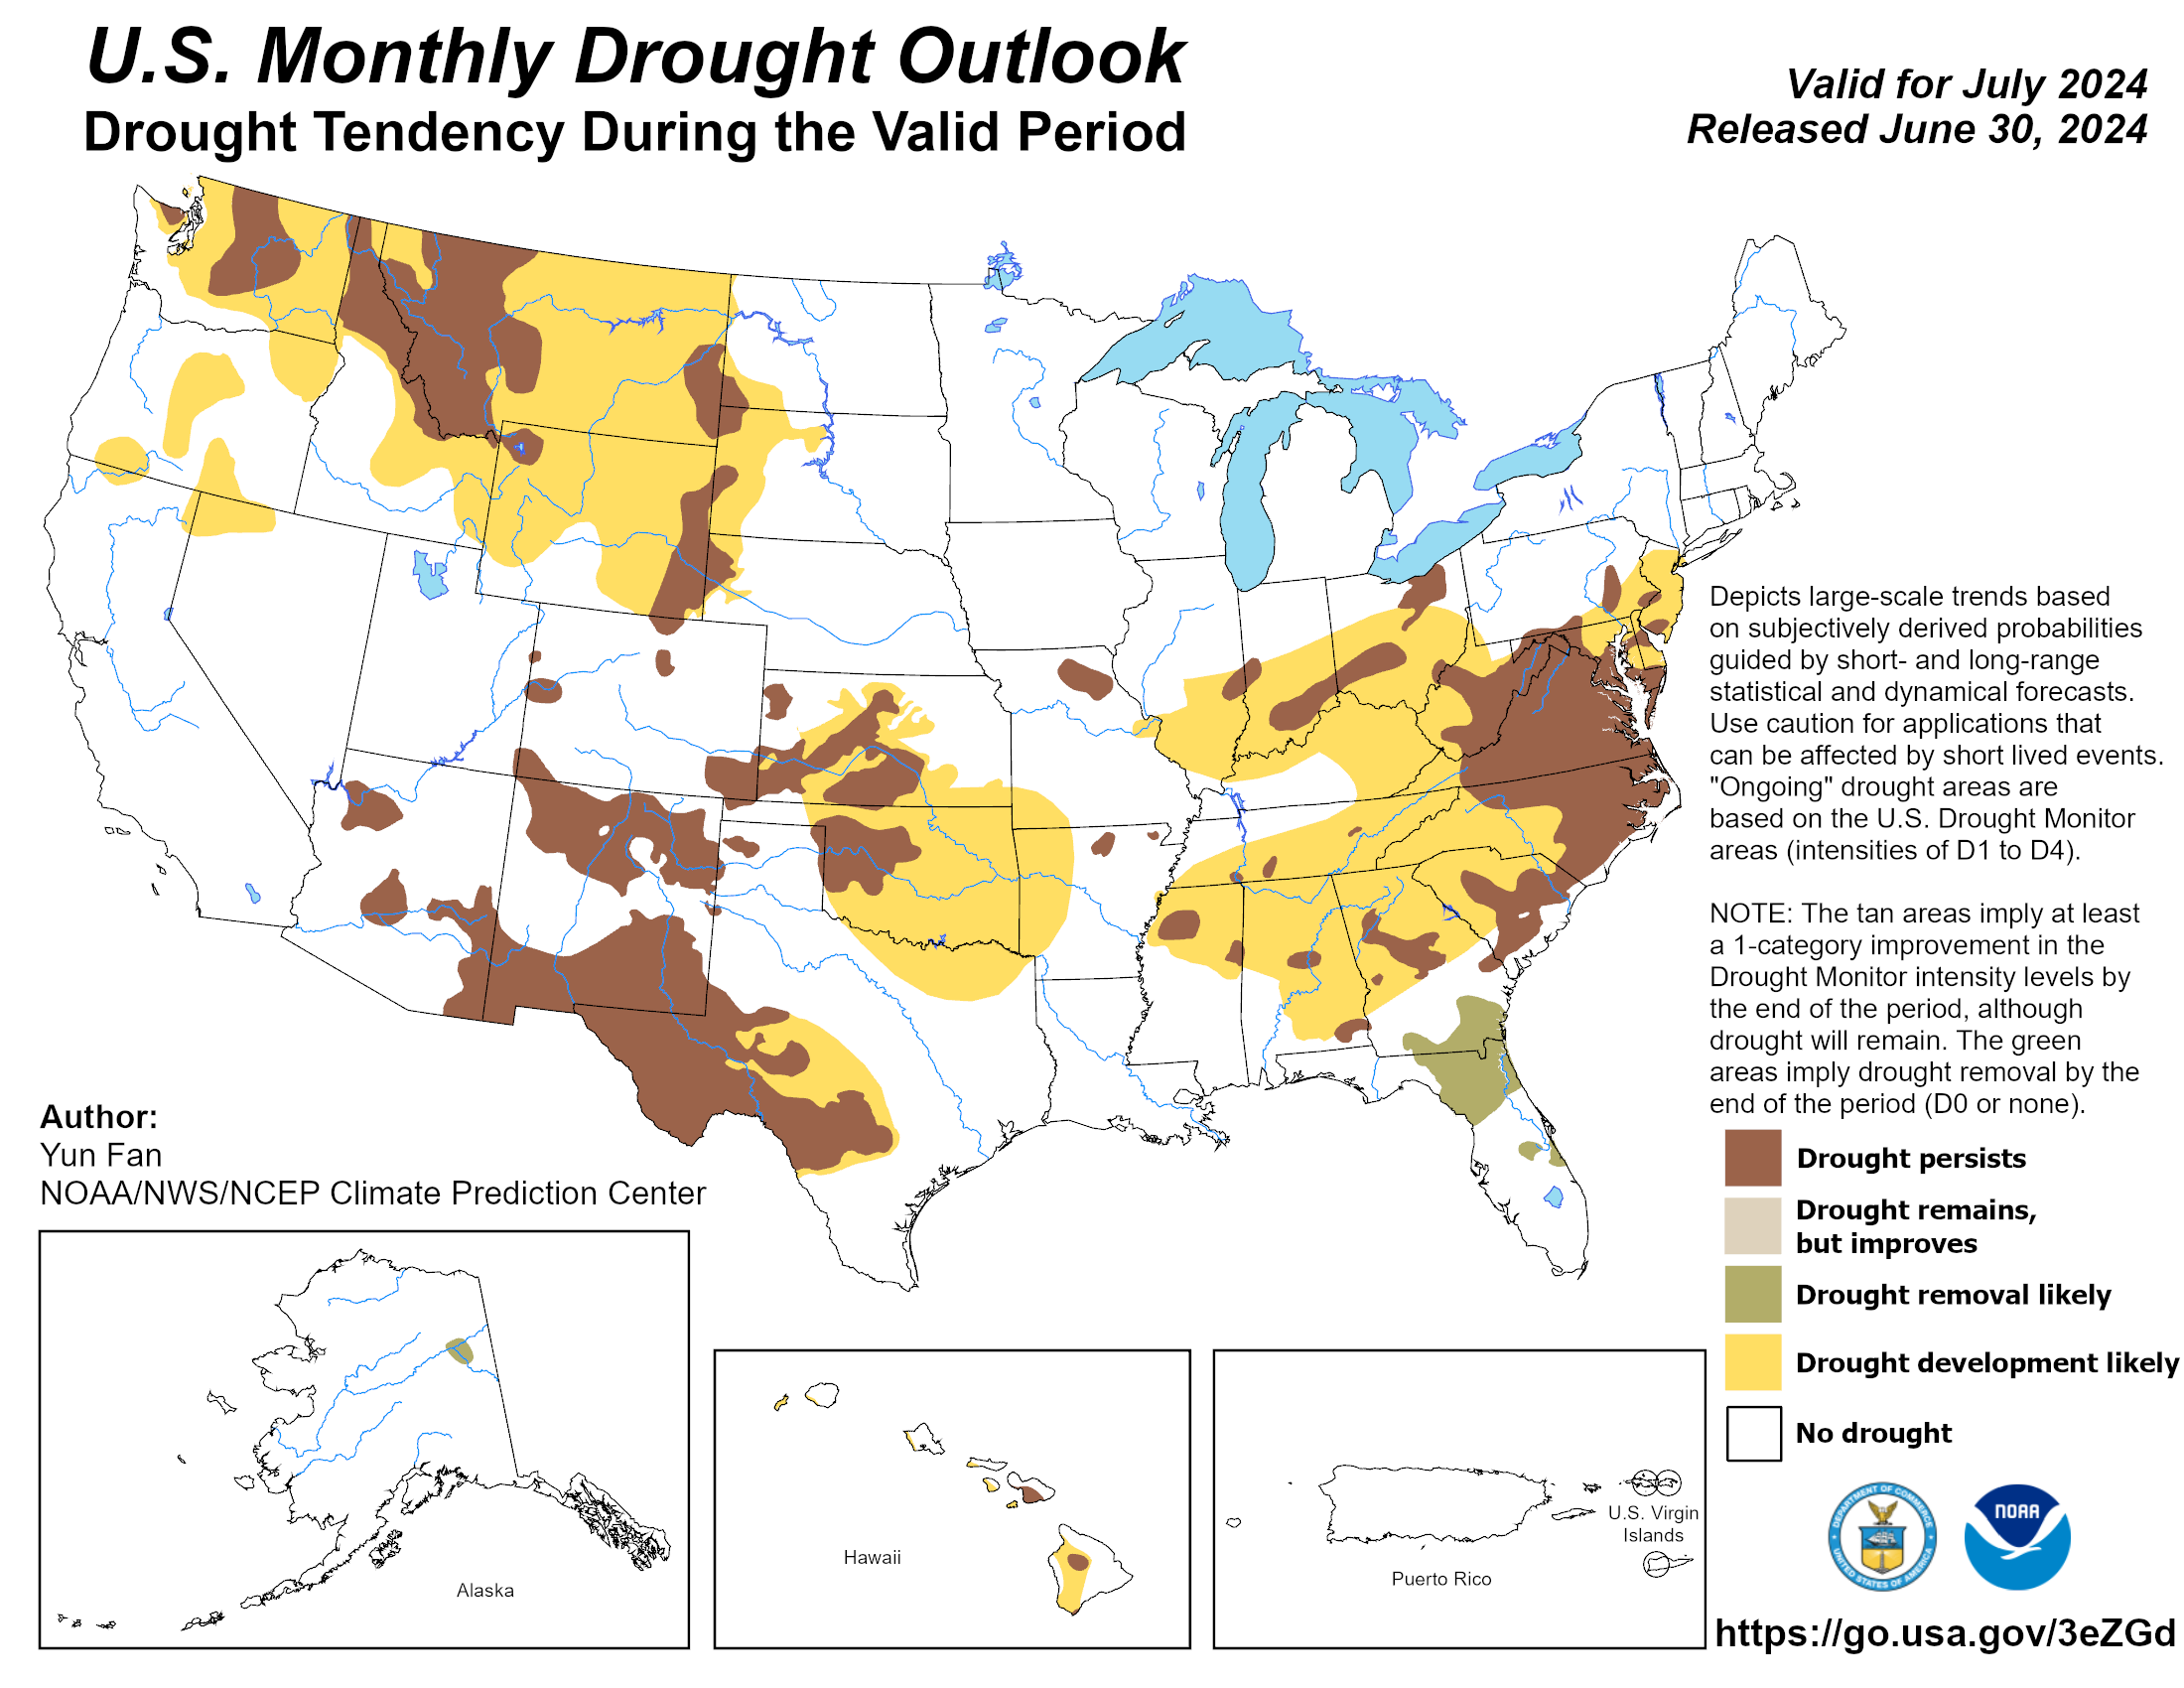 New August 2018 Drought Outlook